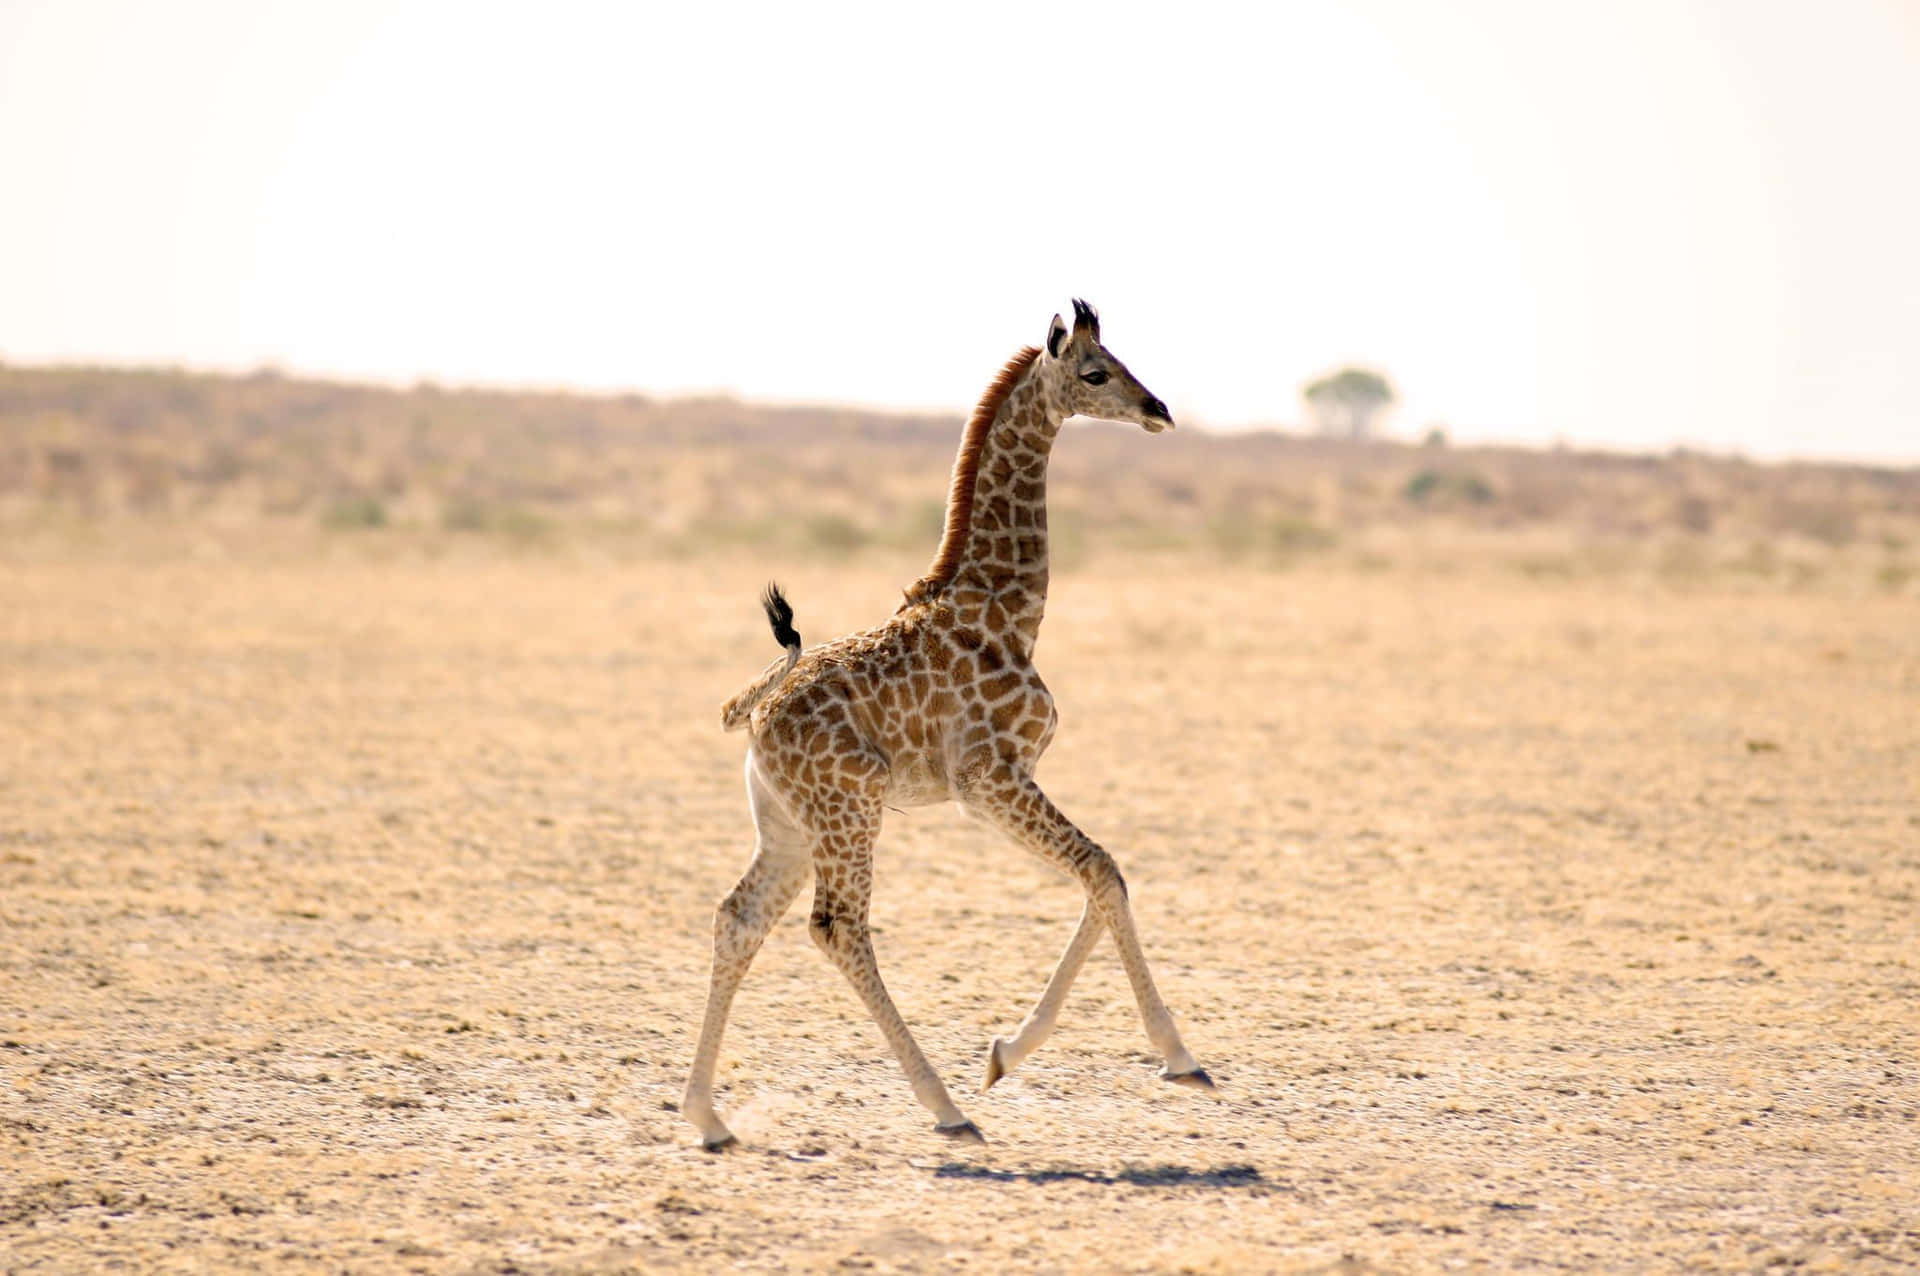 Funny Giraffe Walking On Drought Land Picture